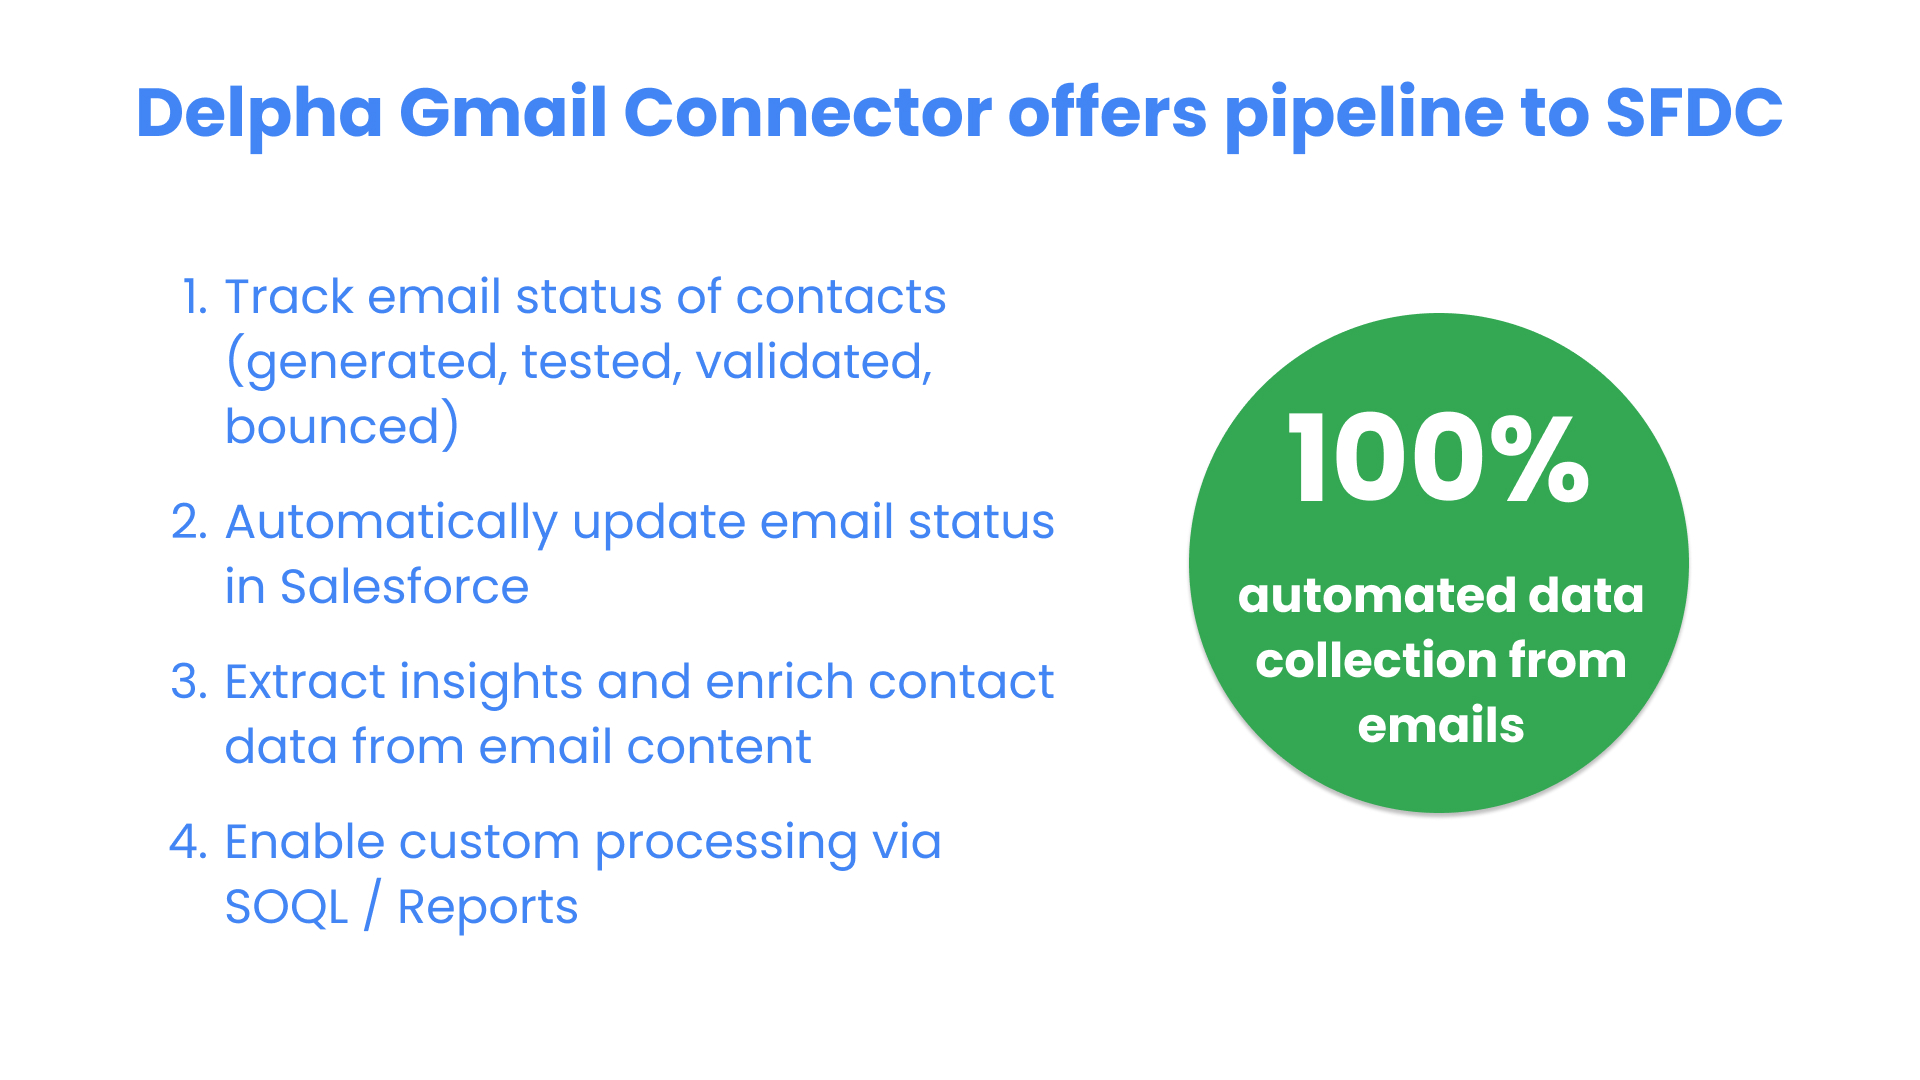 The benefits of connecting your Gmail account to Salesforce is the ability to automatically track and update email statuses of your Contacts and Clients as well as extract insights from the email content to get saved inside Salesforce